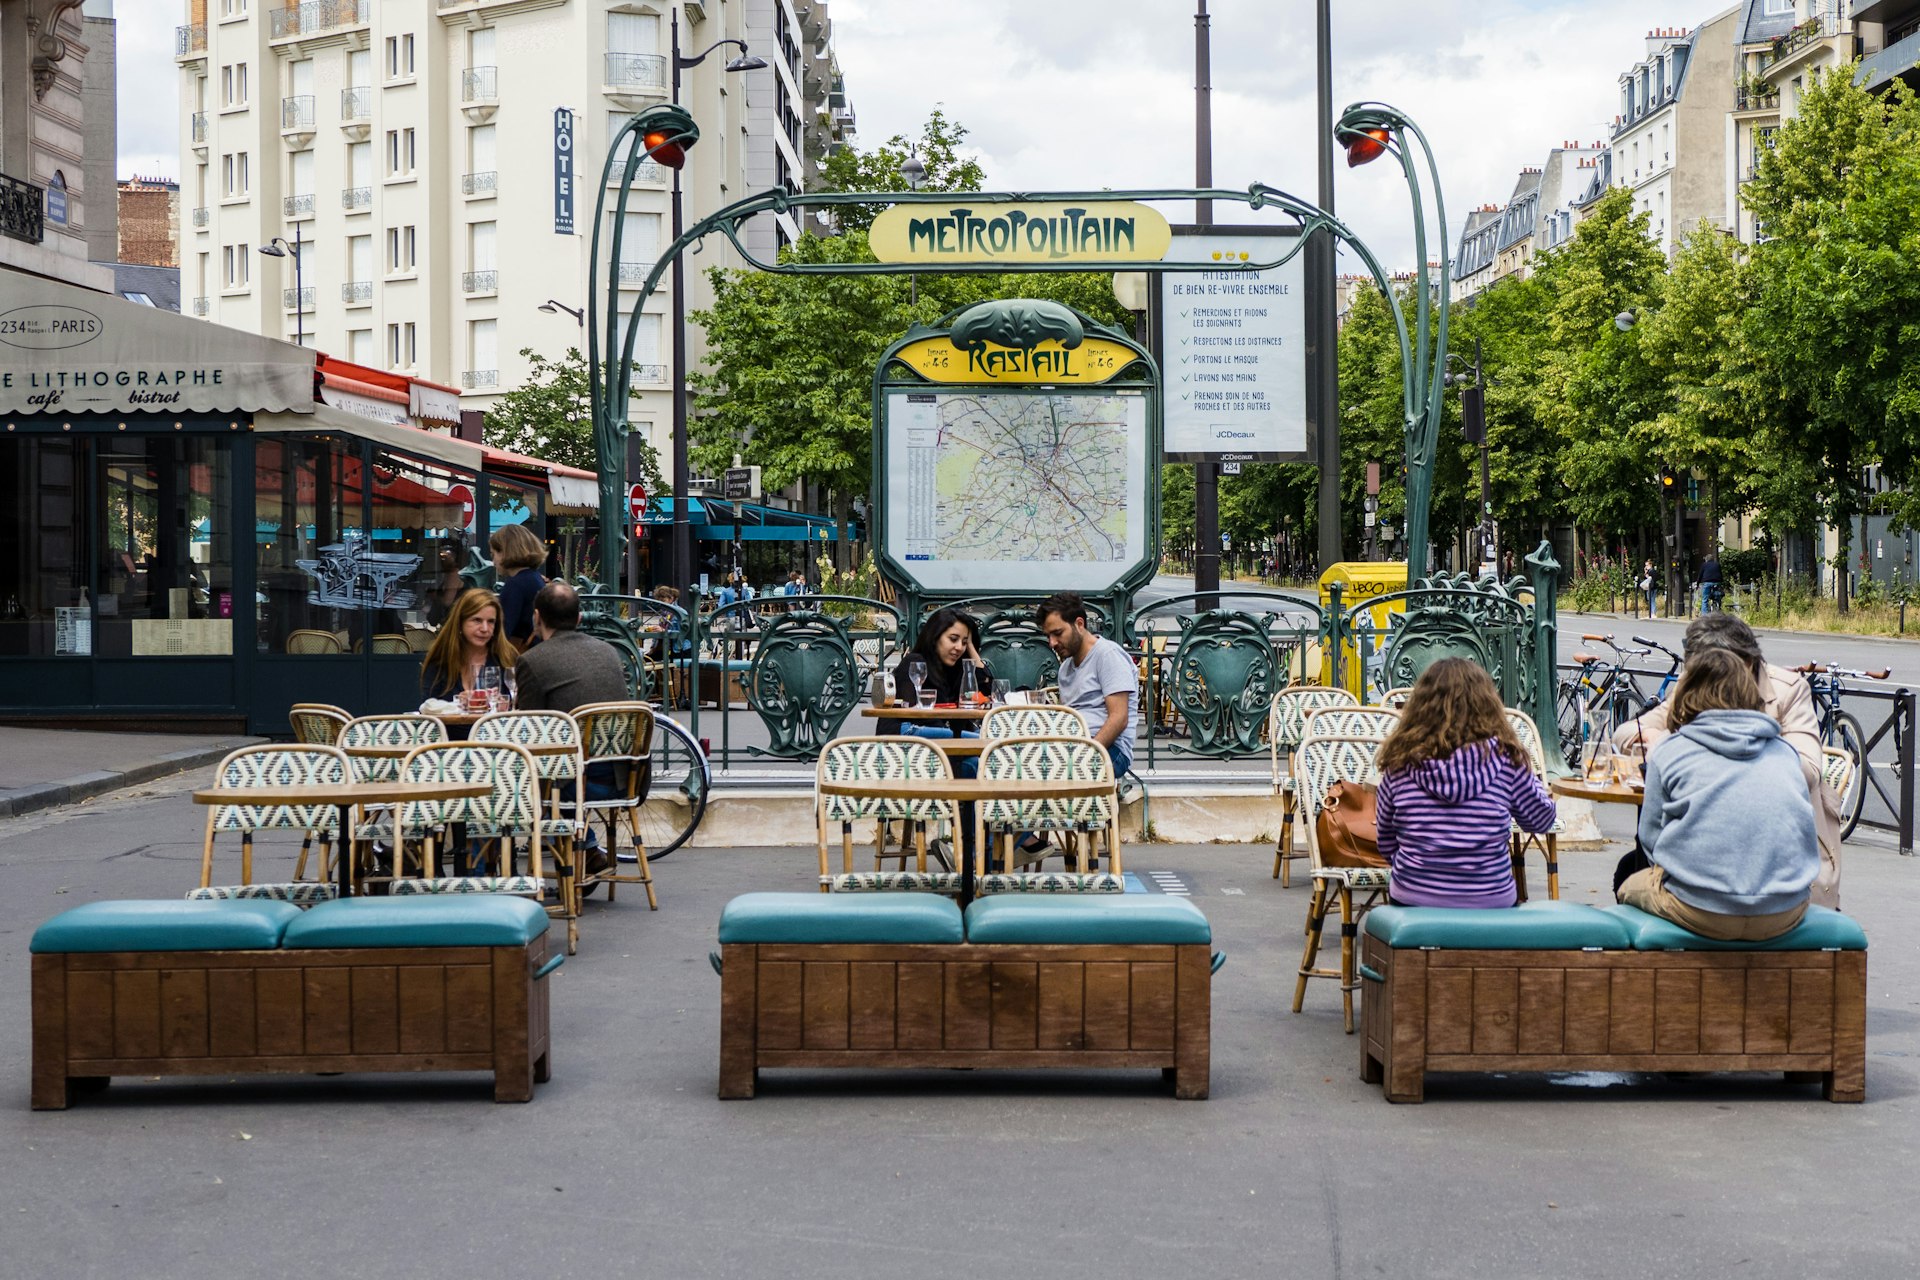 A sidewalk cafe in Paris with customers spread out to socially distance